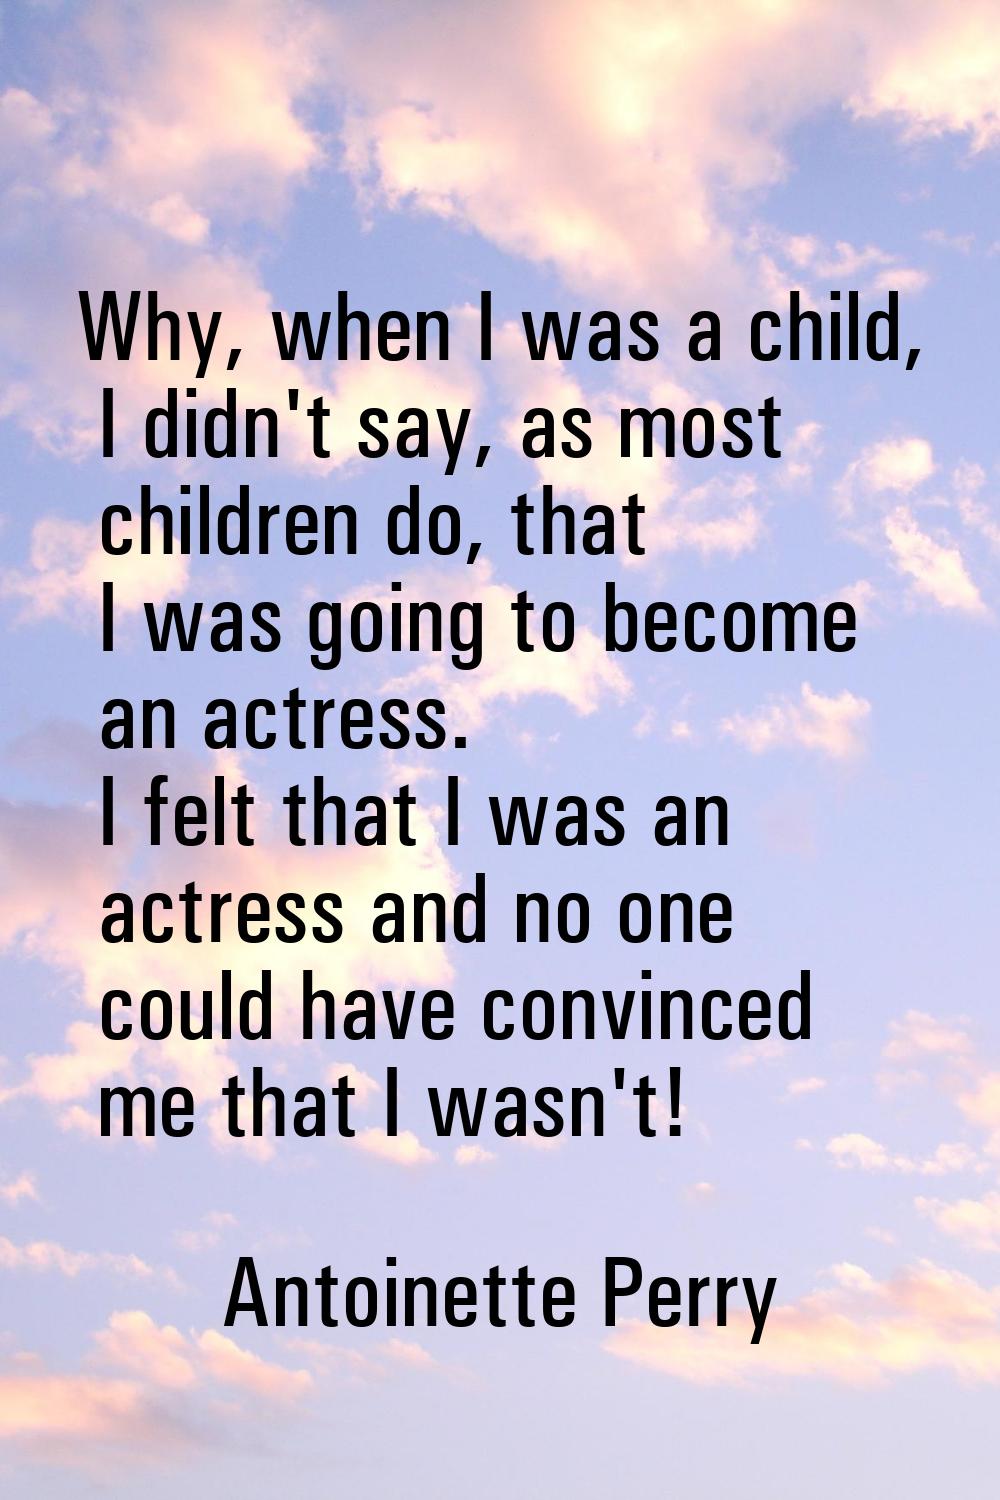 Why, when I was a child, I didn't say, as most children do, that I was going to become an actress. 